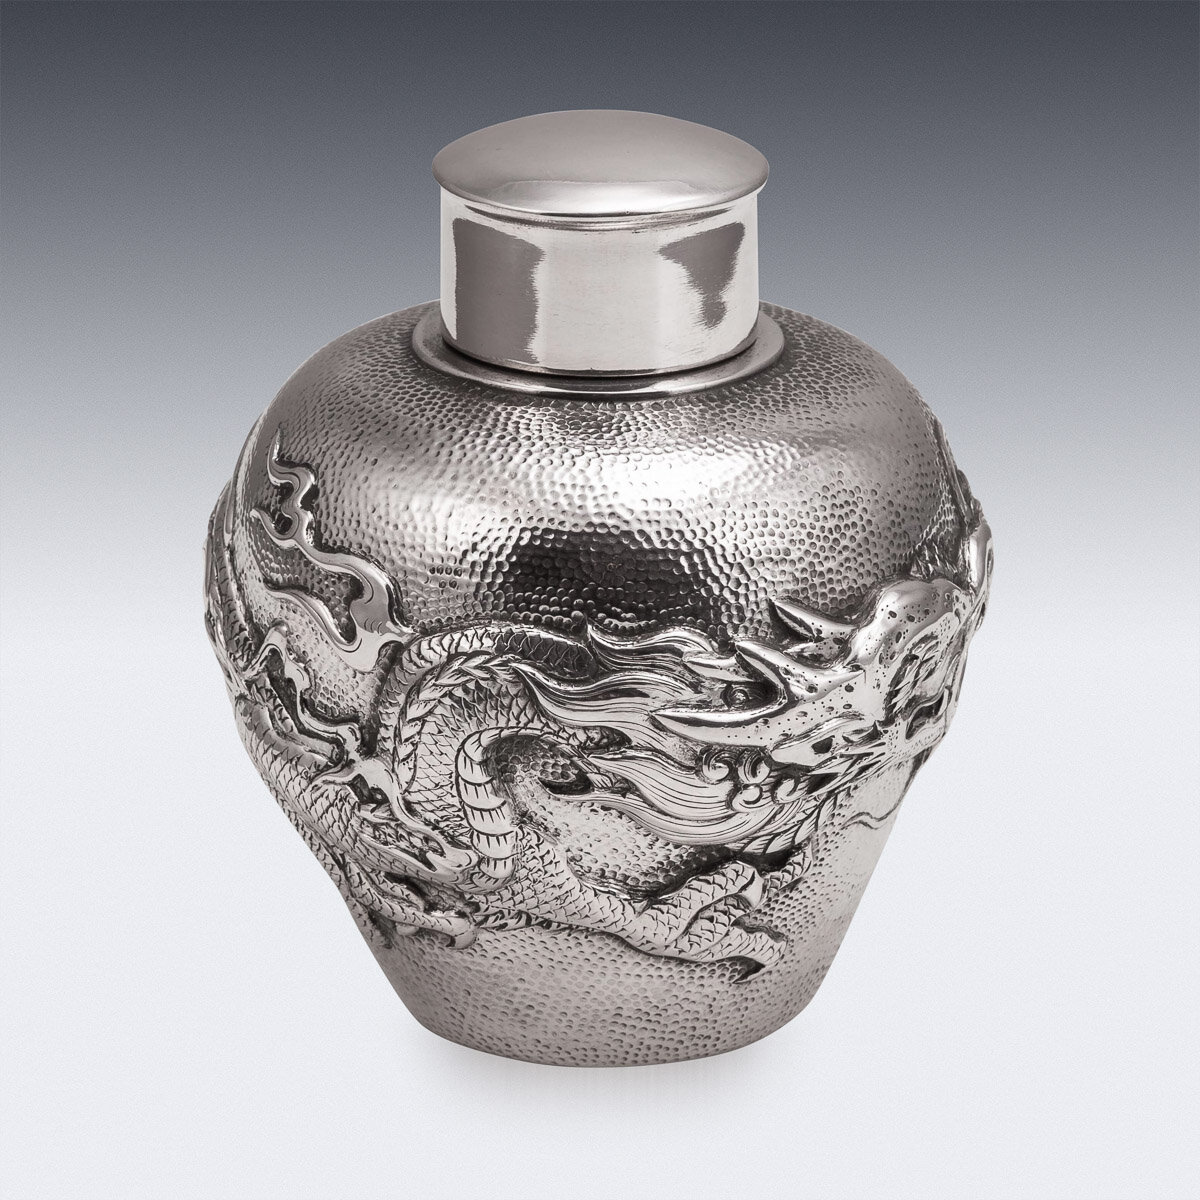 Exquisite hand-carved ORIENTAL OLD TIBET SILVER Dragon tea caddy/1 